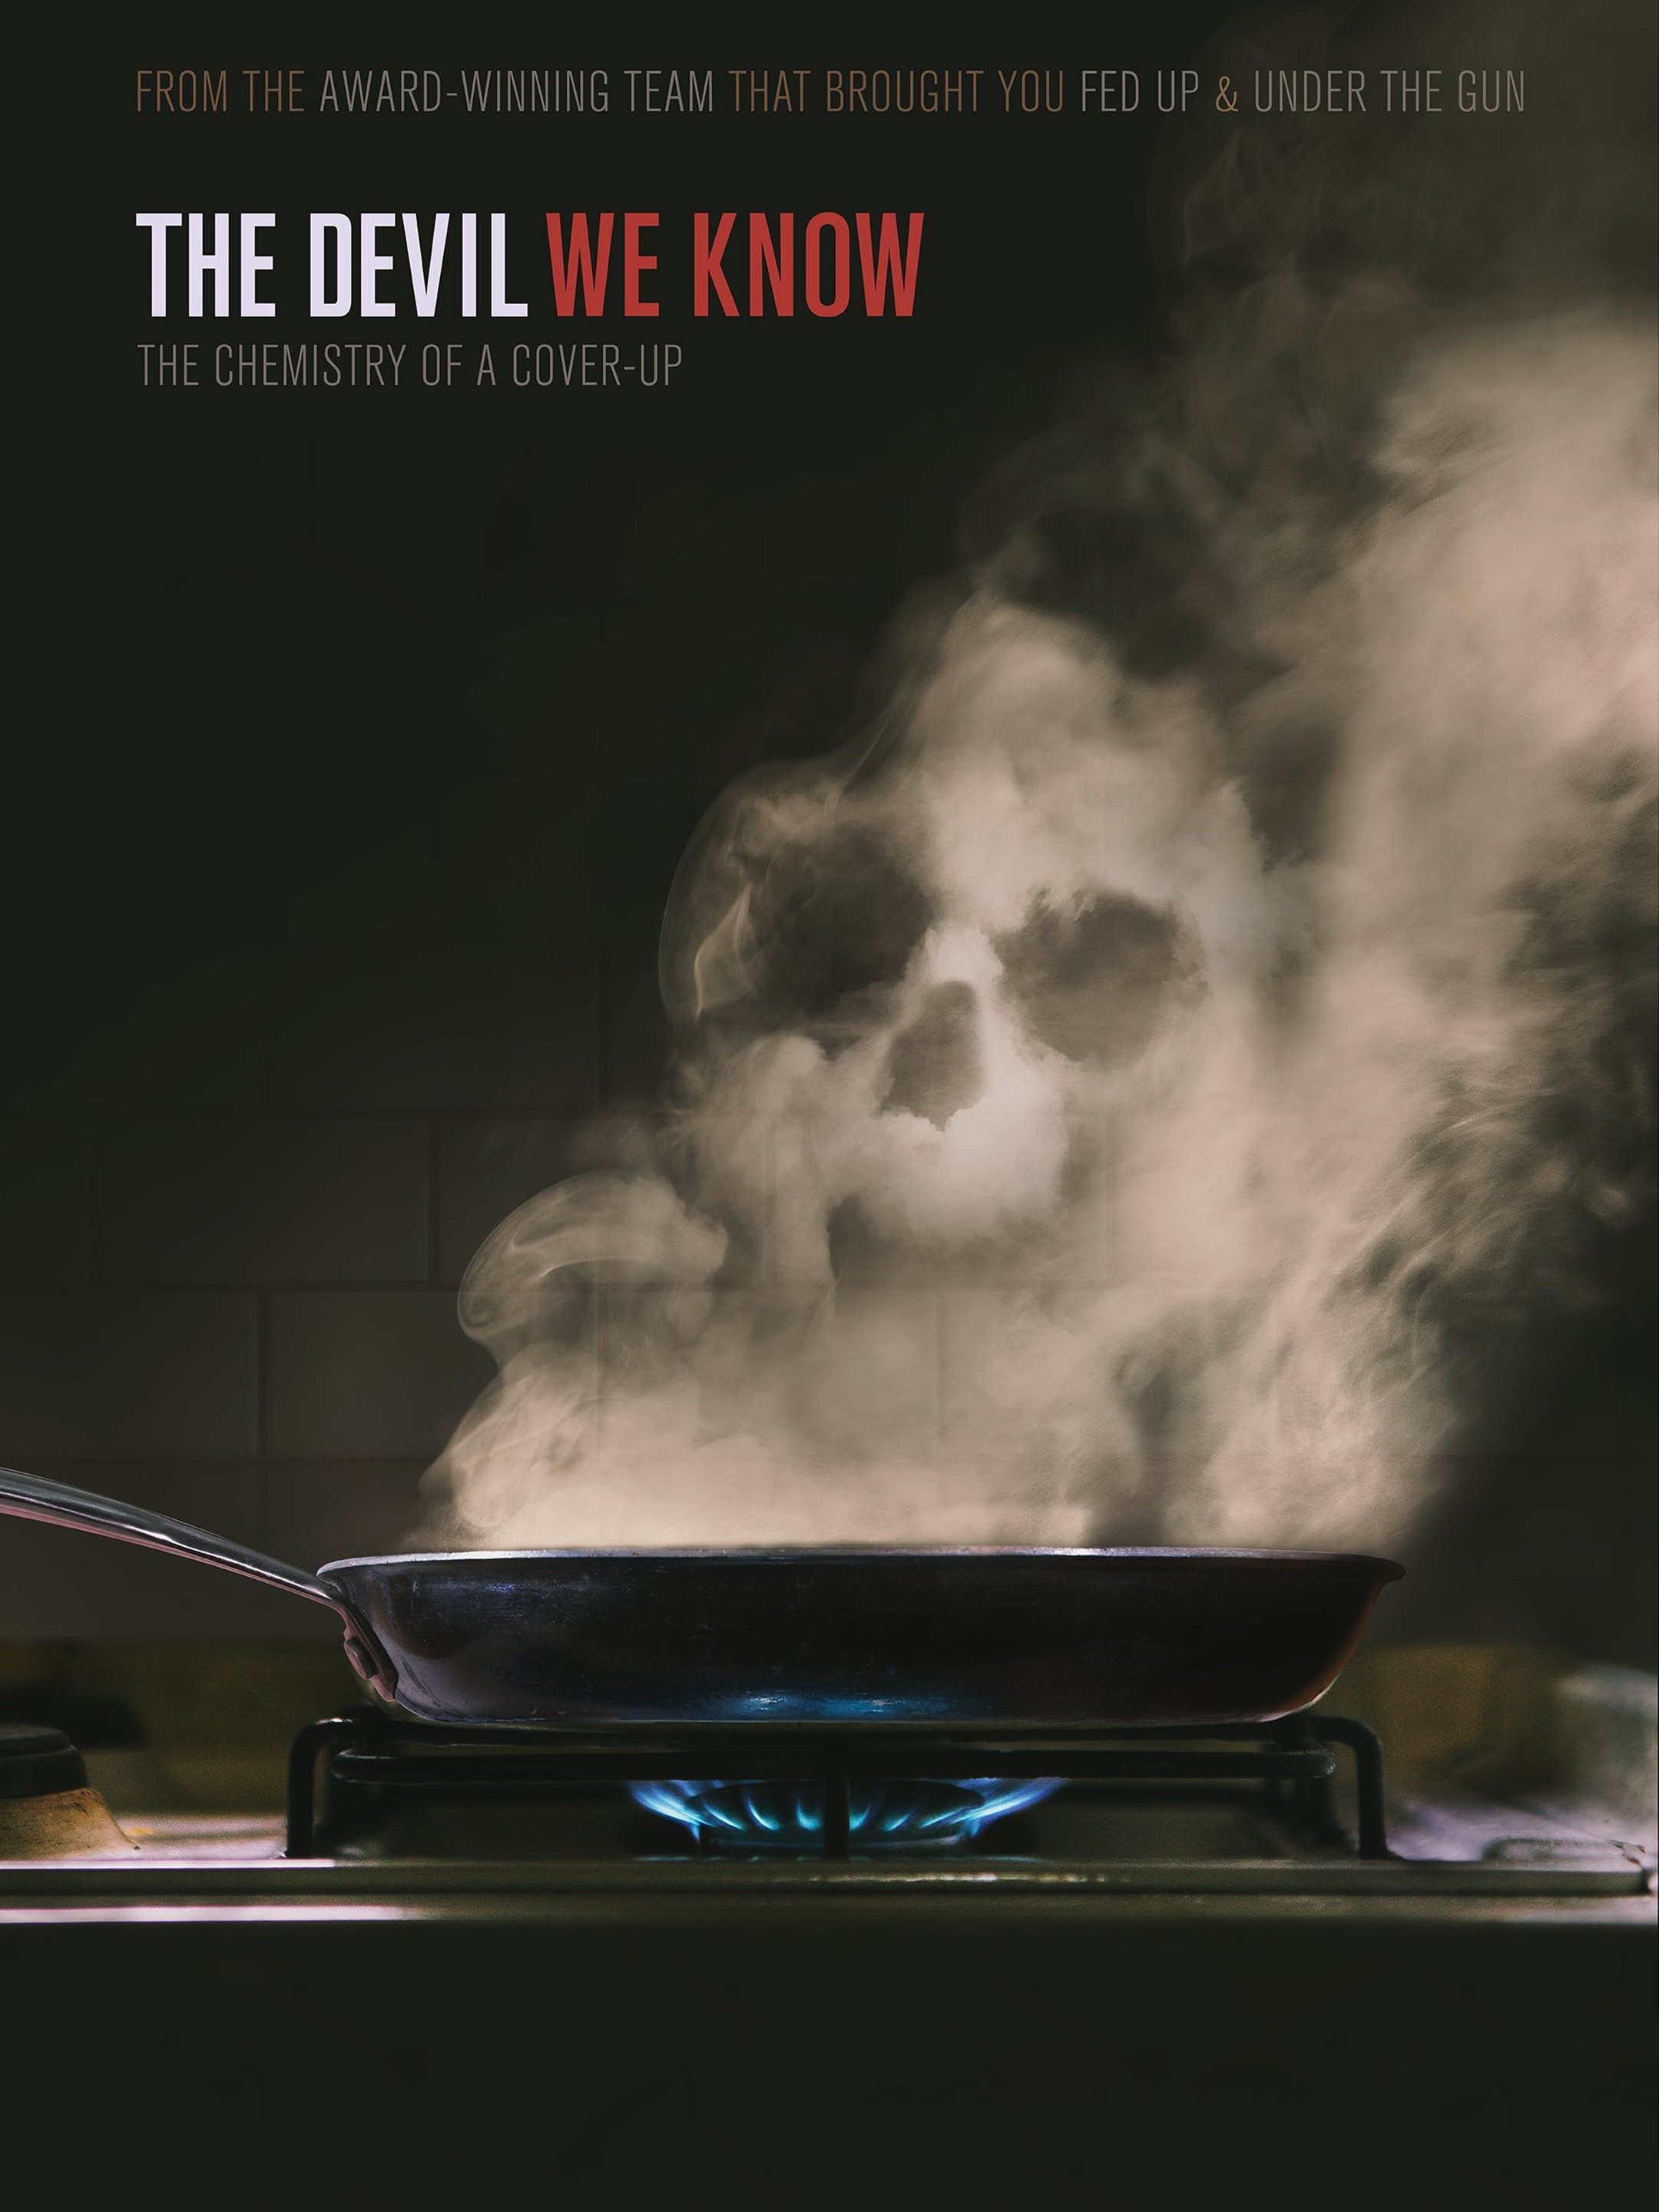 The Devil All the Time - Rotten Tomatoes